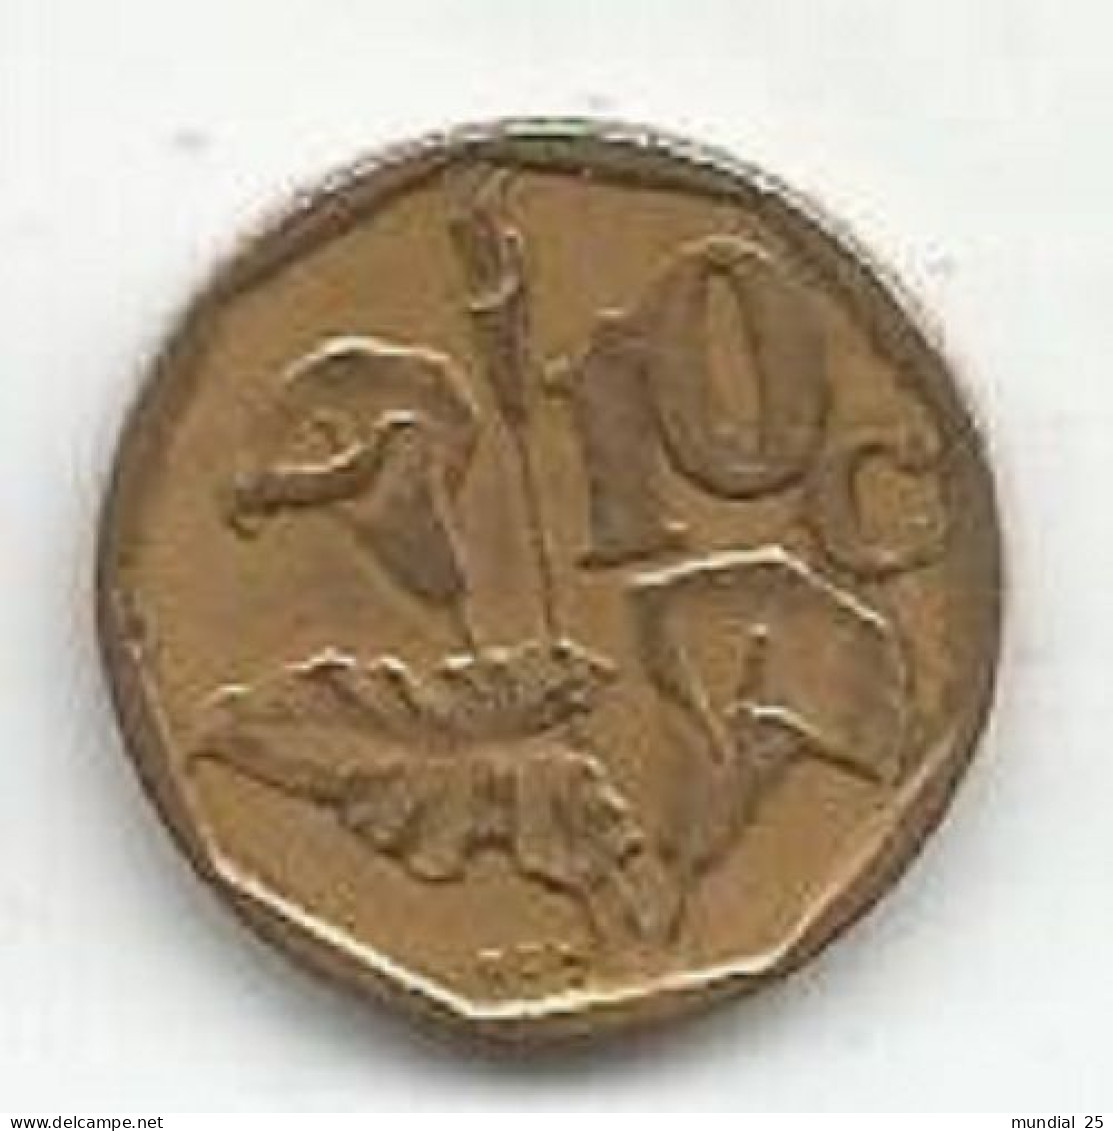 SOUTH AFRICA 10 CENTS 1992 - Sud Africa